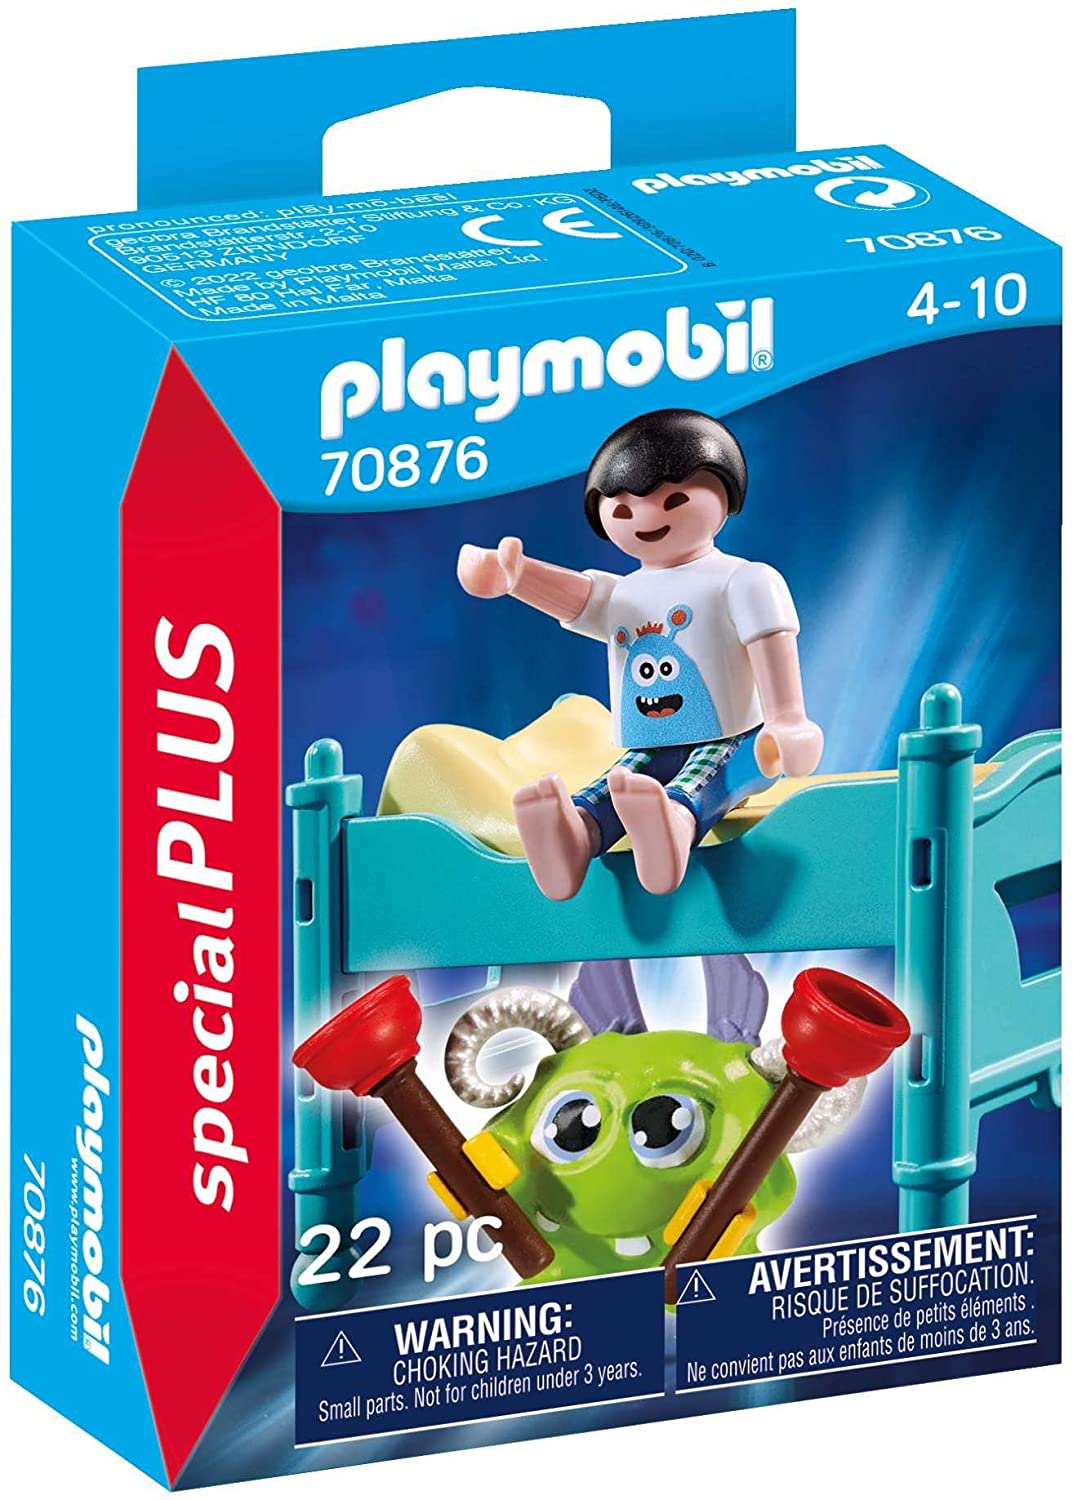 Playmobil 70876 Toys, Multicoloured, one Size